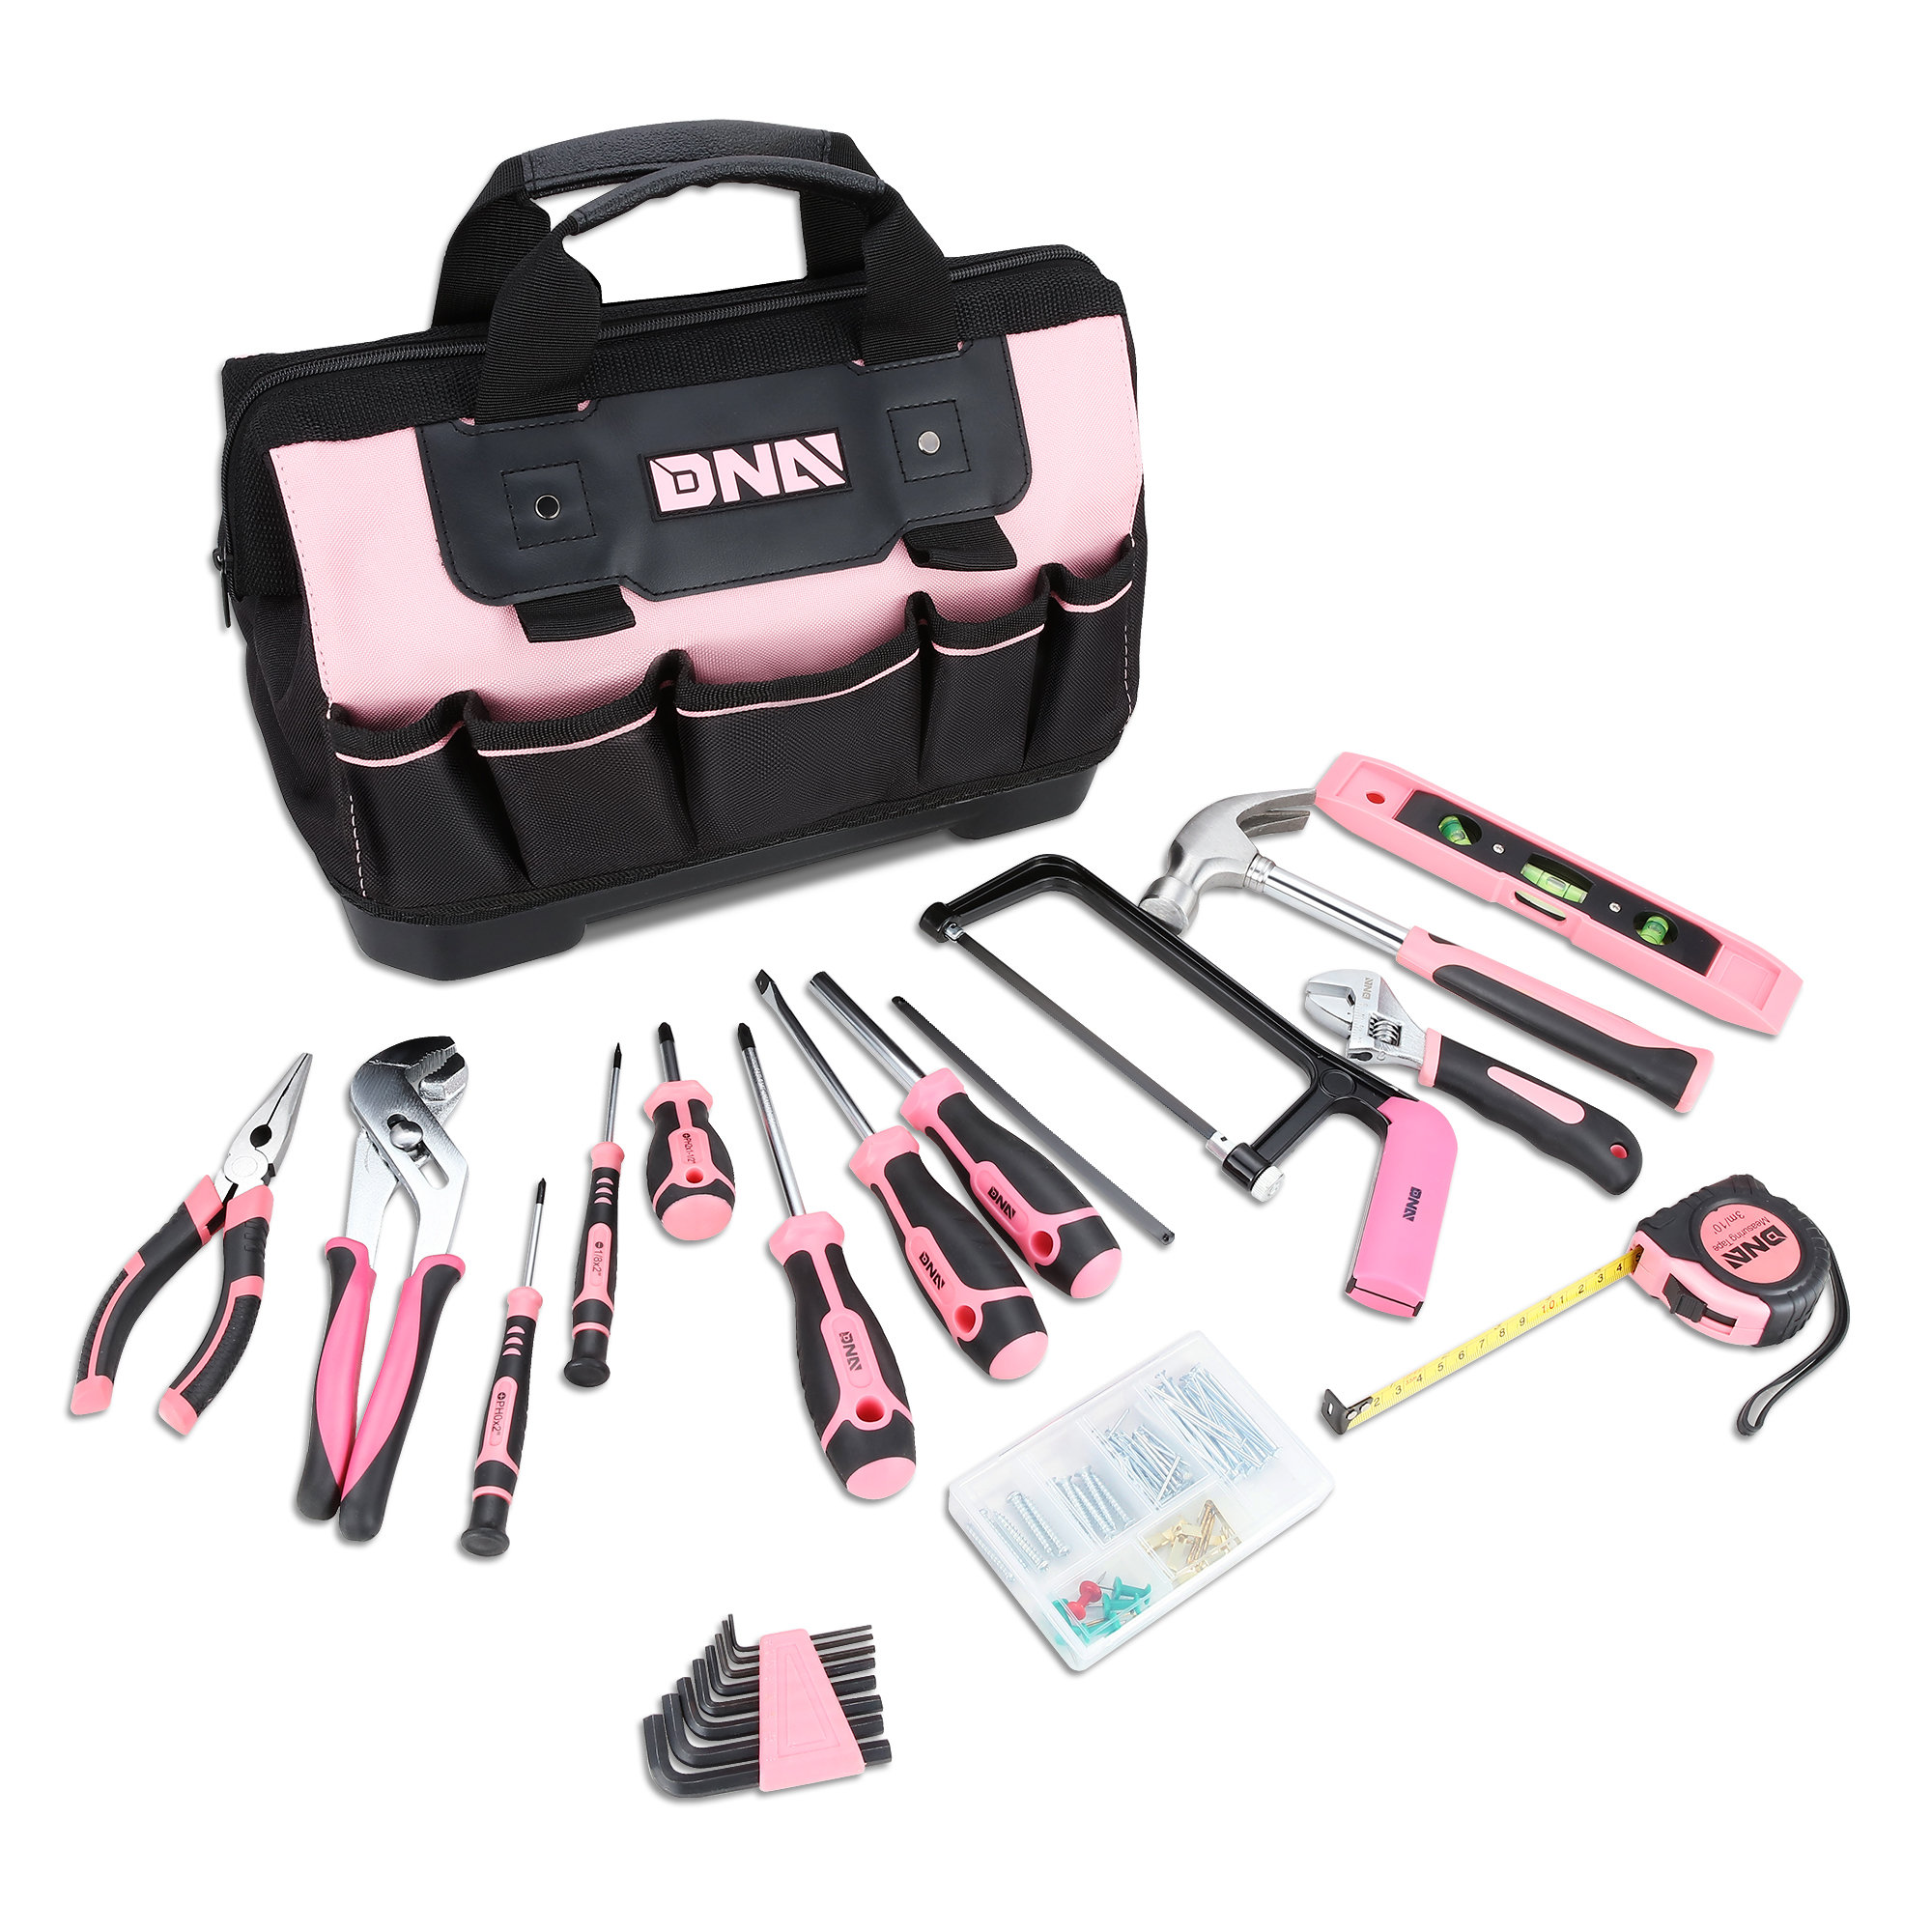 WORKPRO 52-Piece Pink Tools Set, Household Lady Tool Kit with Storage